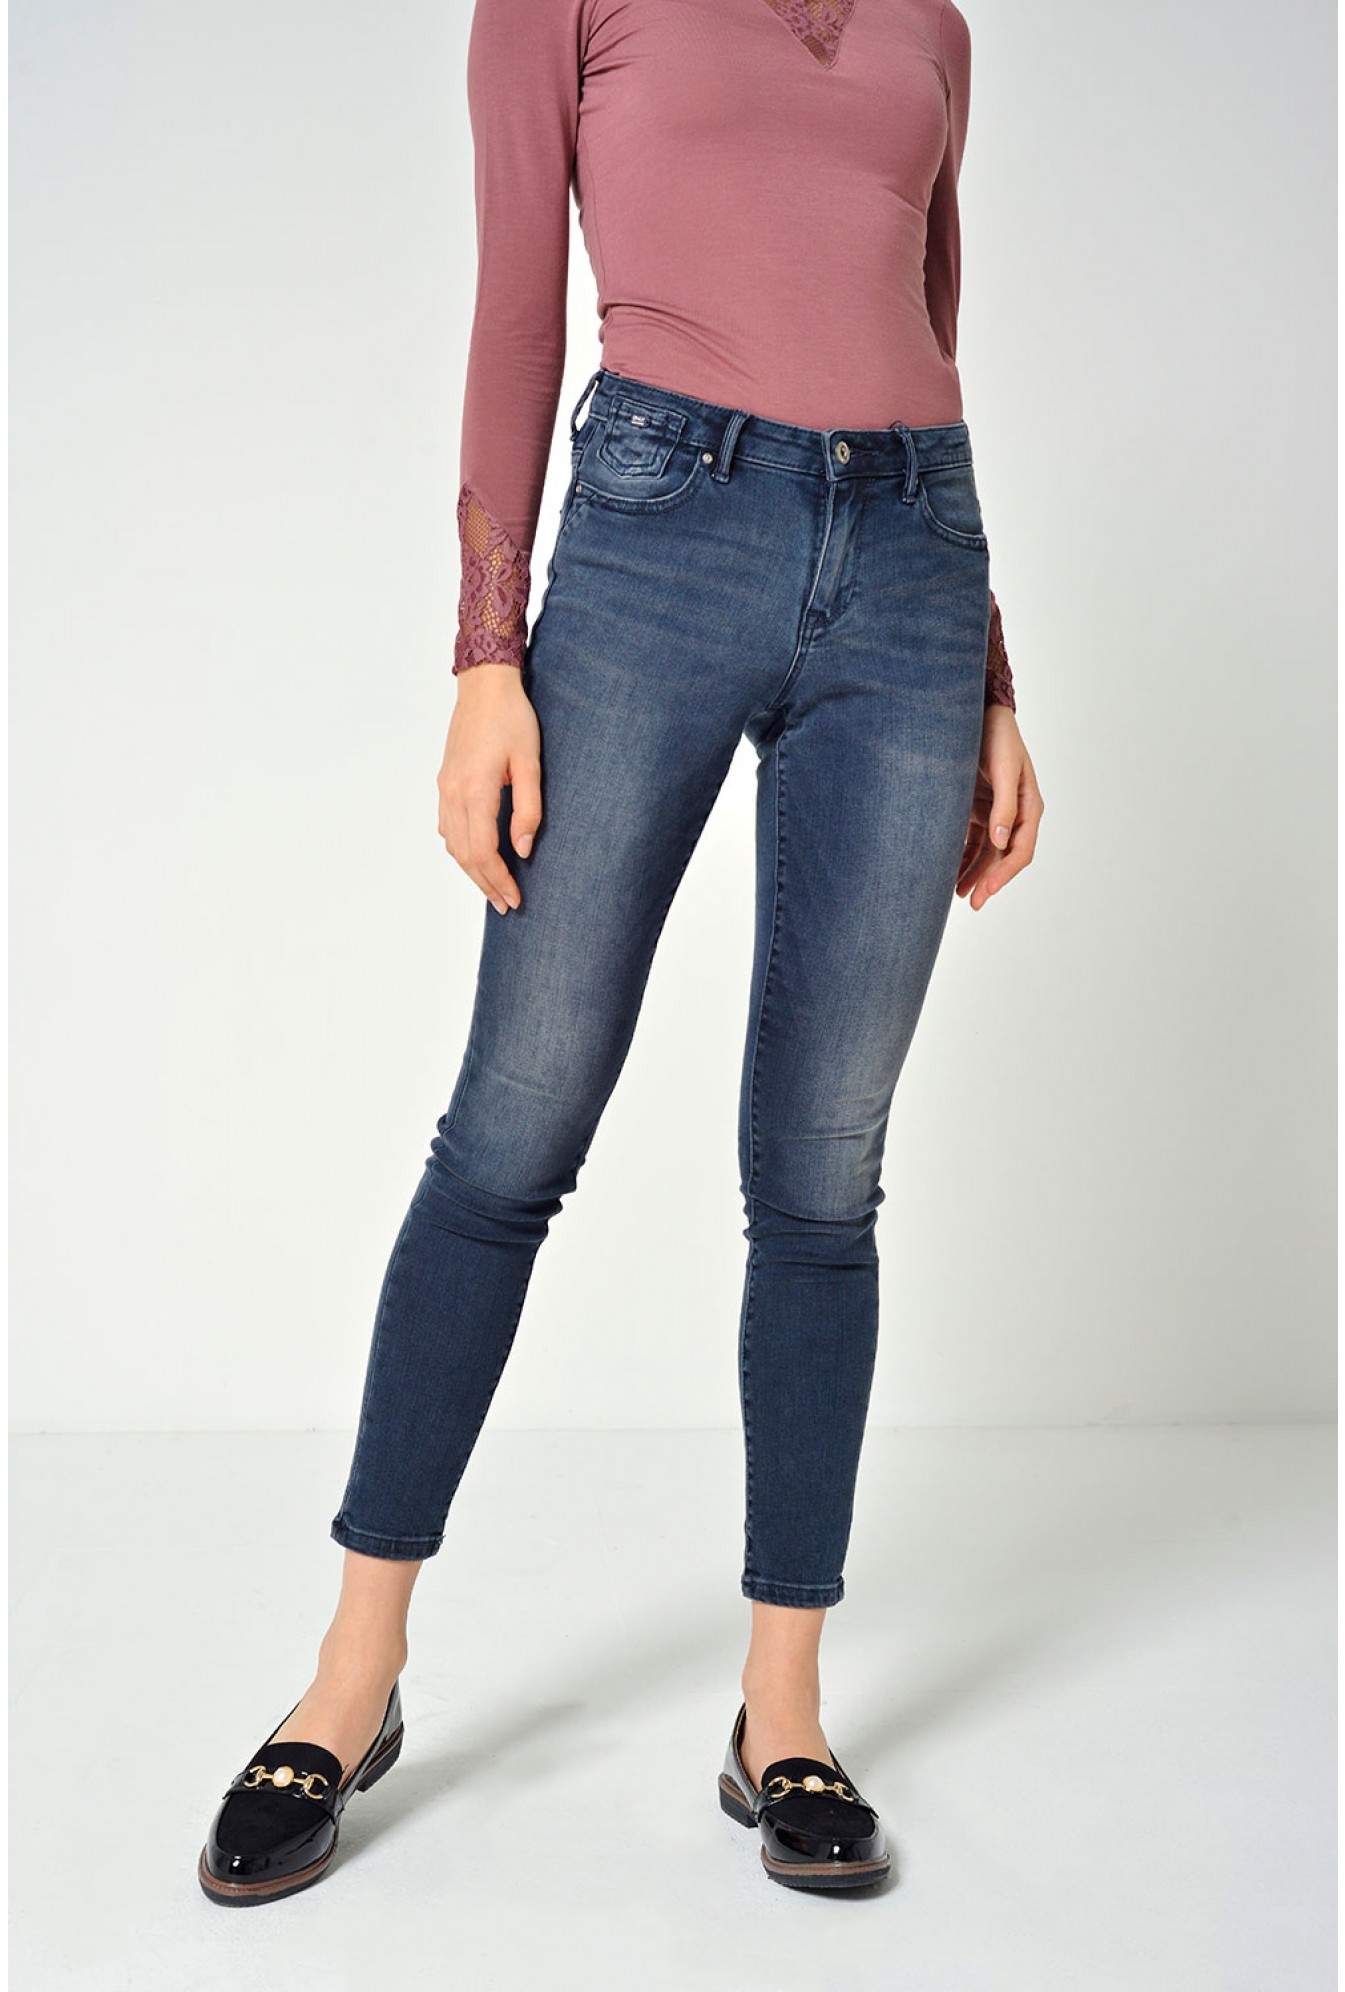 leather jeans h&m